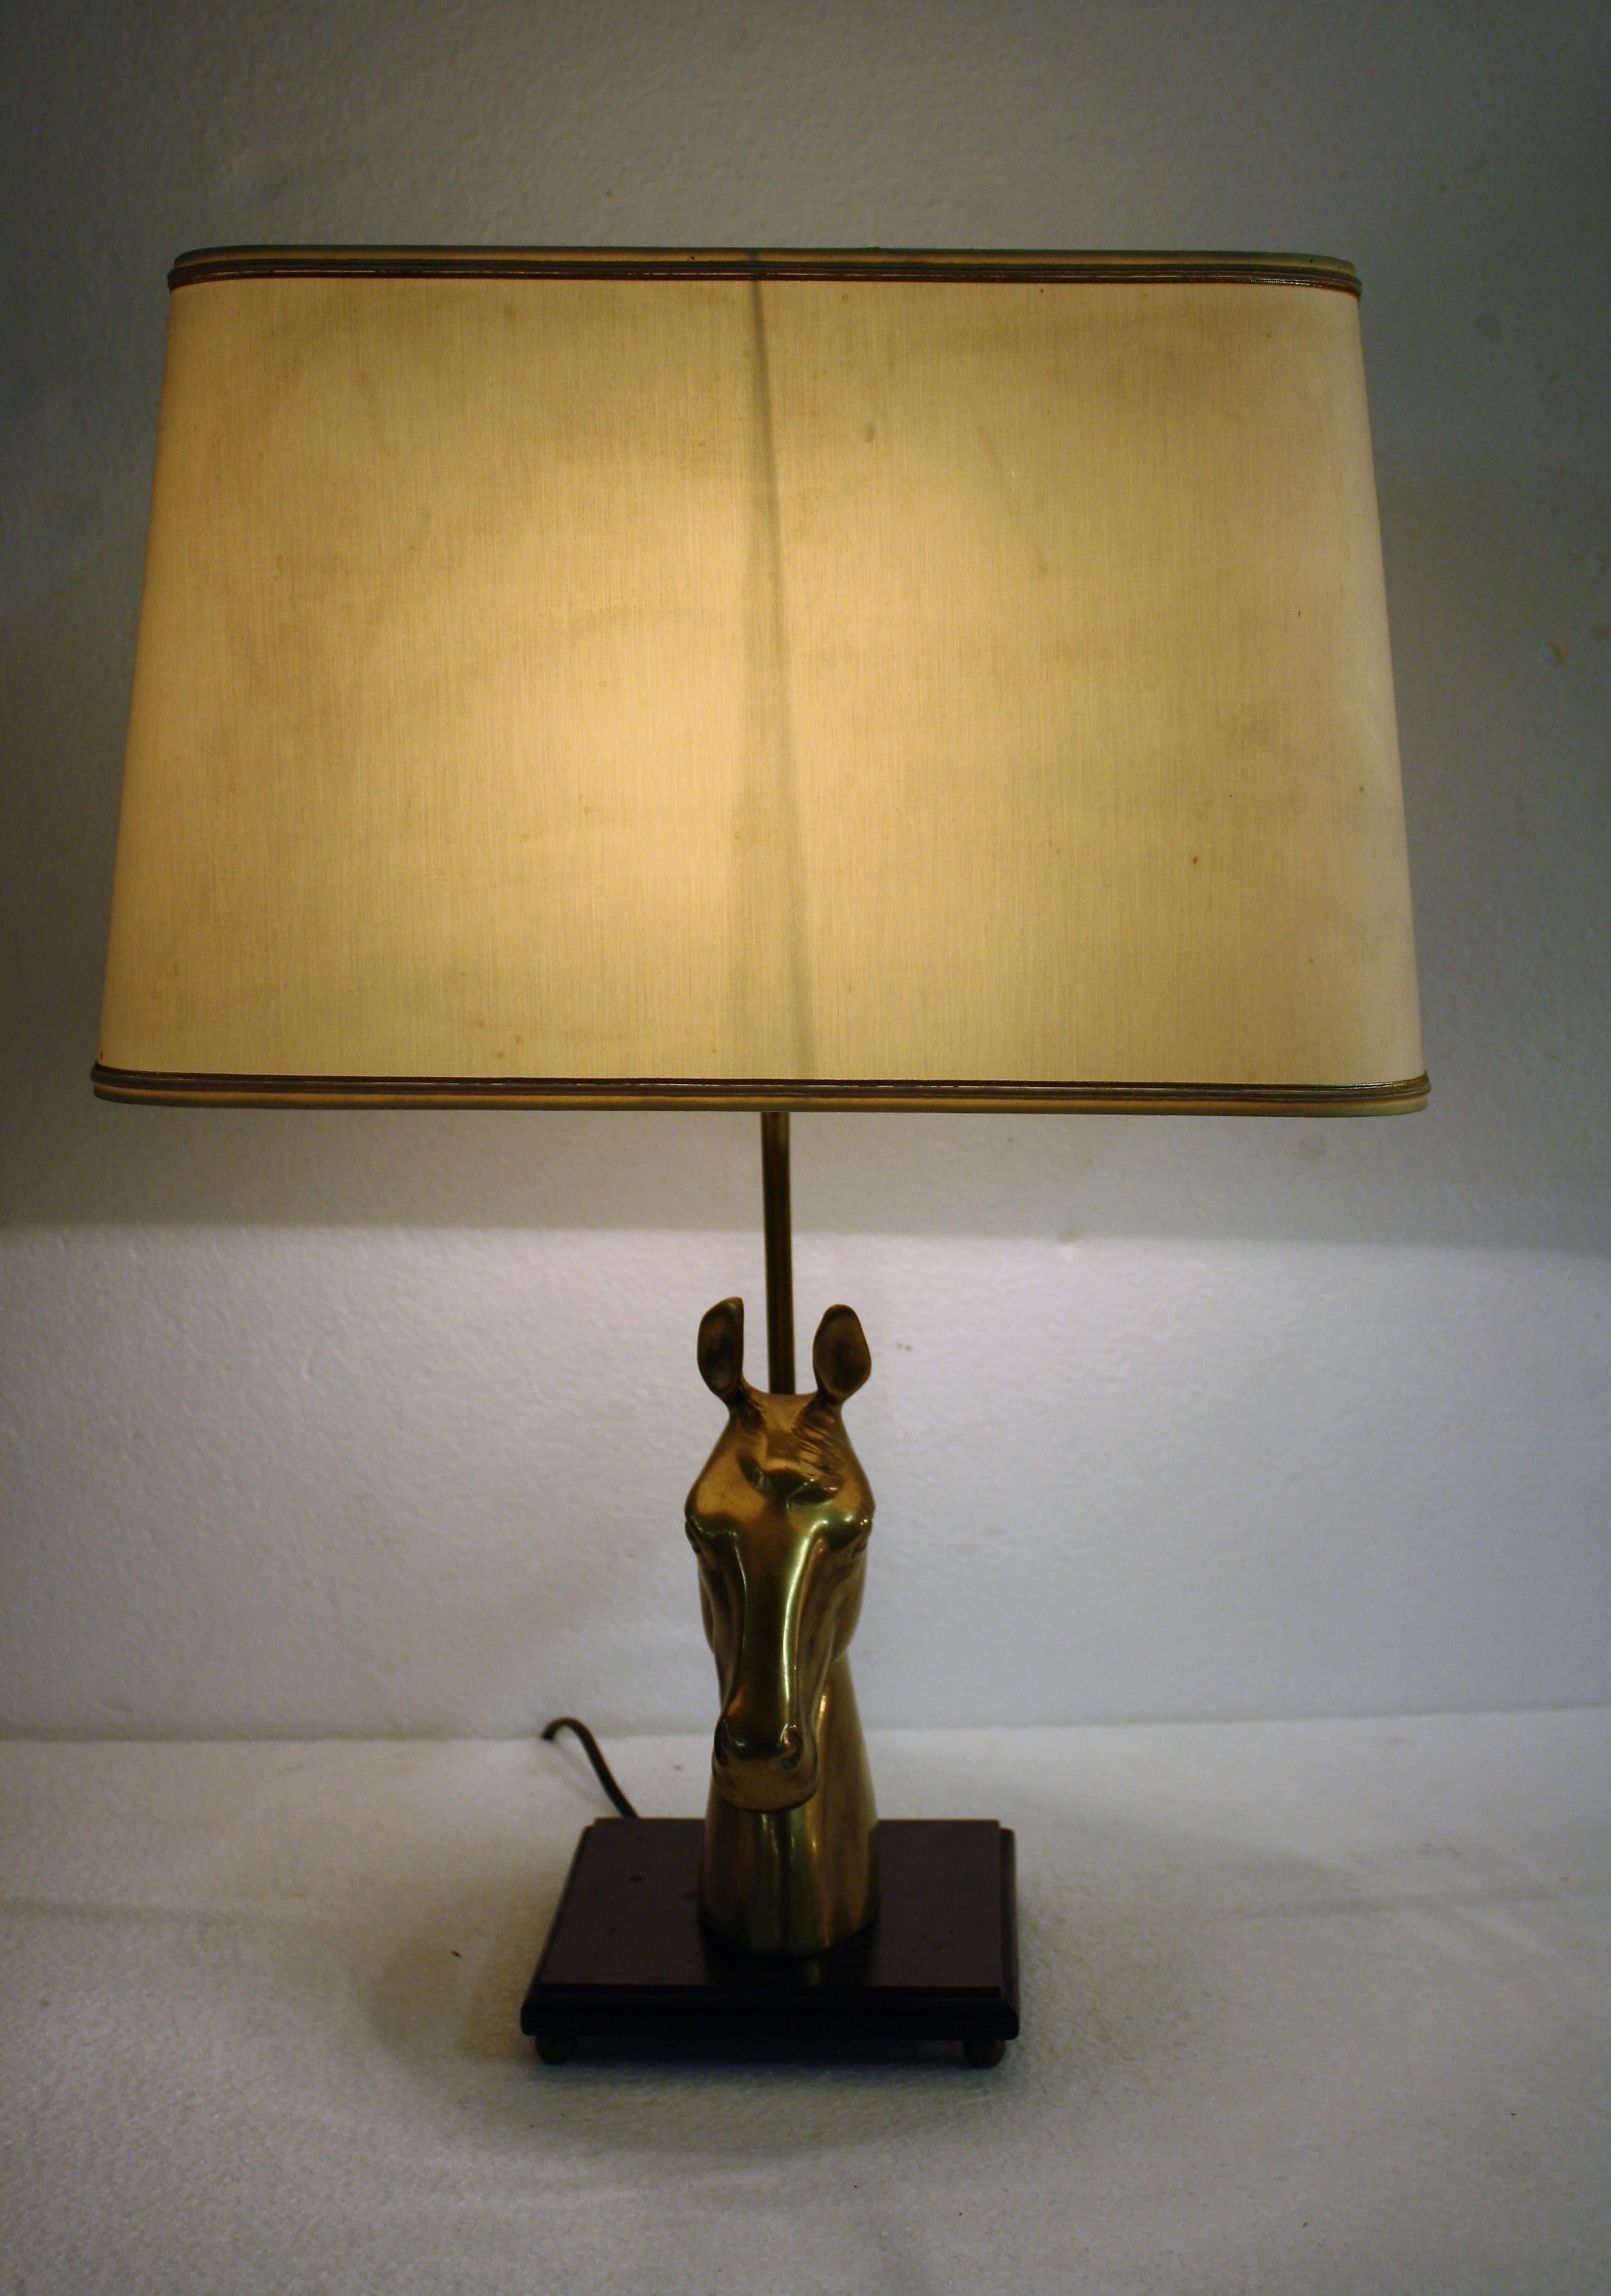 horse table lamp